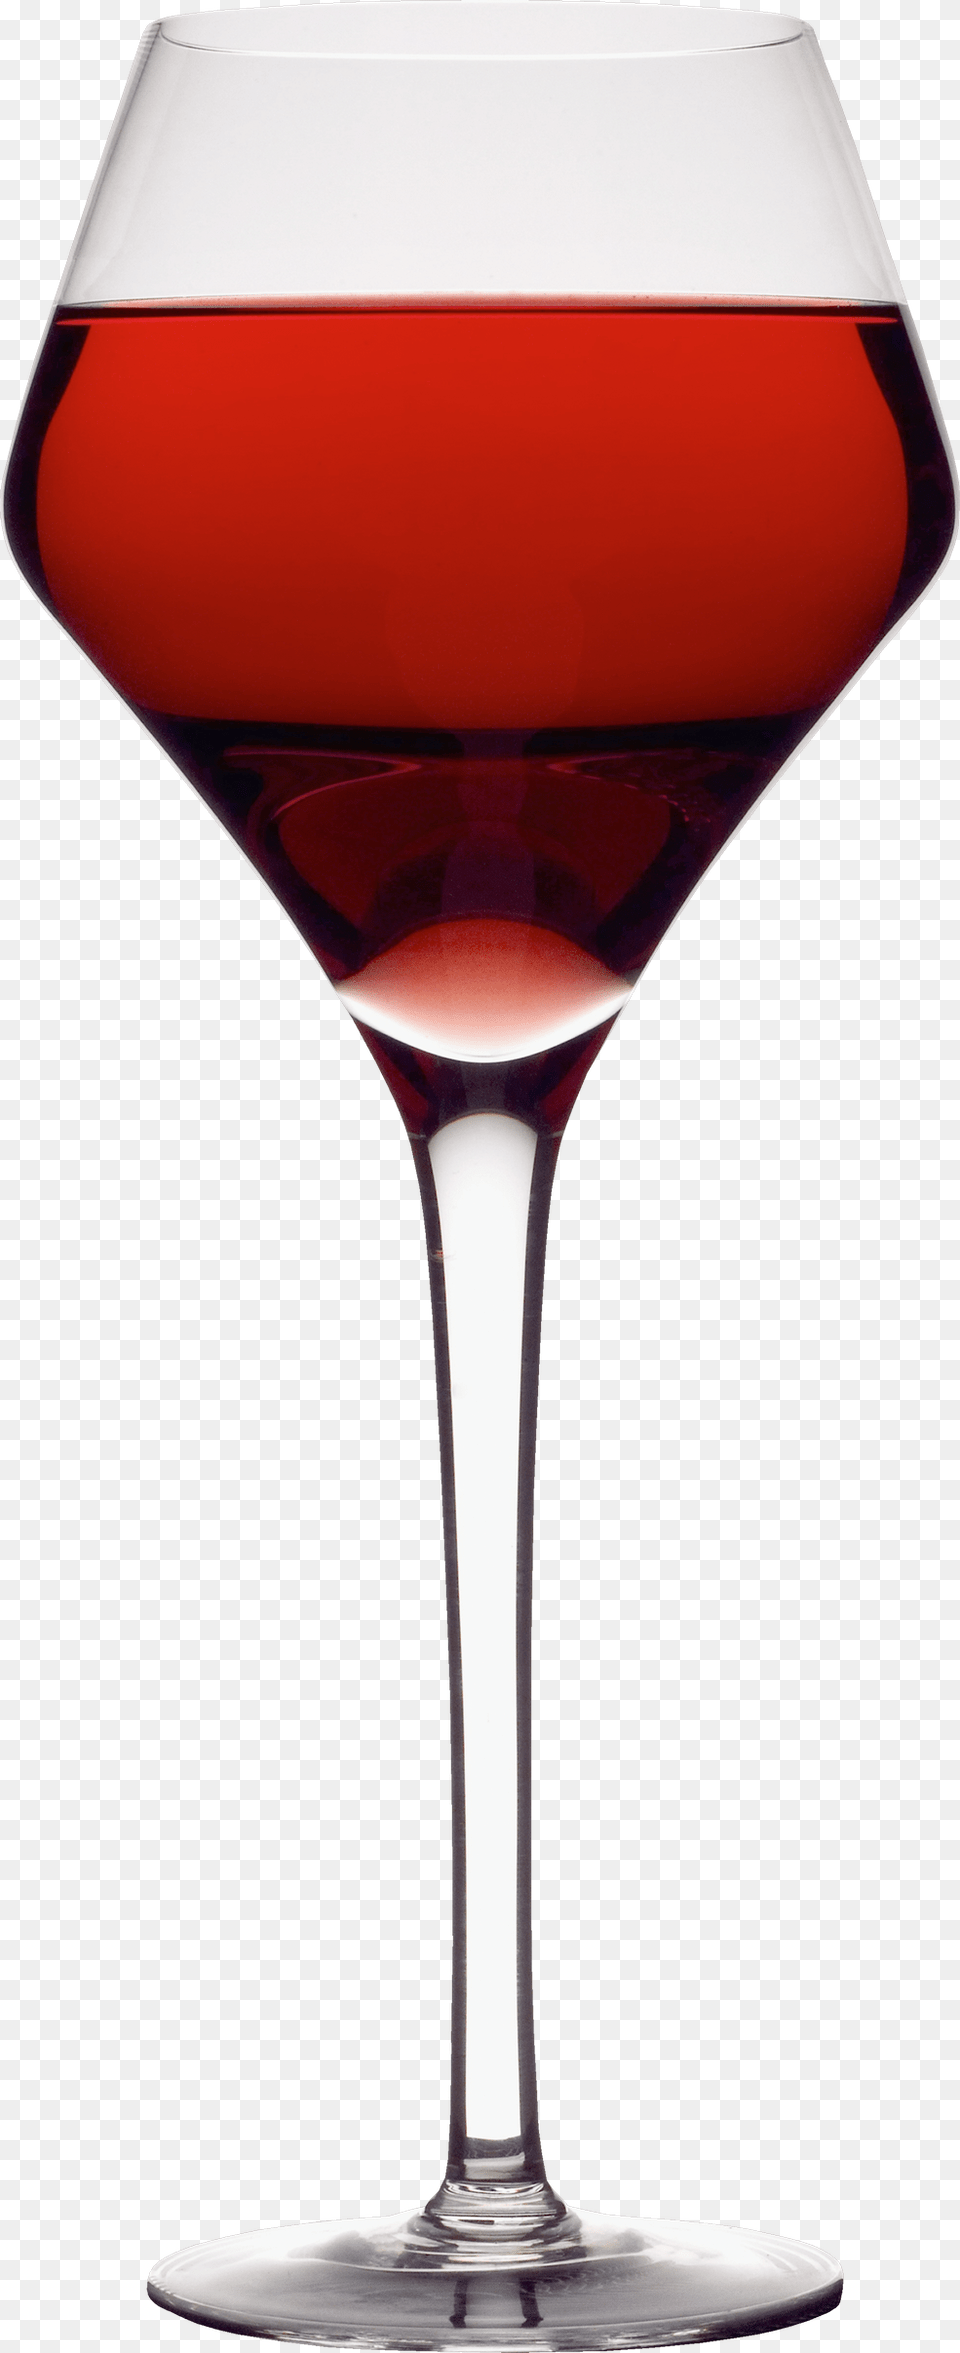 Wine Glass Images Wine Glass No Background, Alcohol, Beverage, Liquor, Red Wine Free Transparent Png